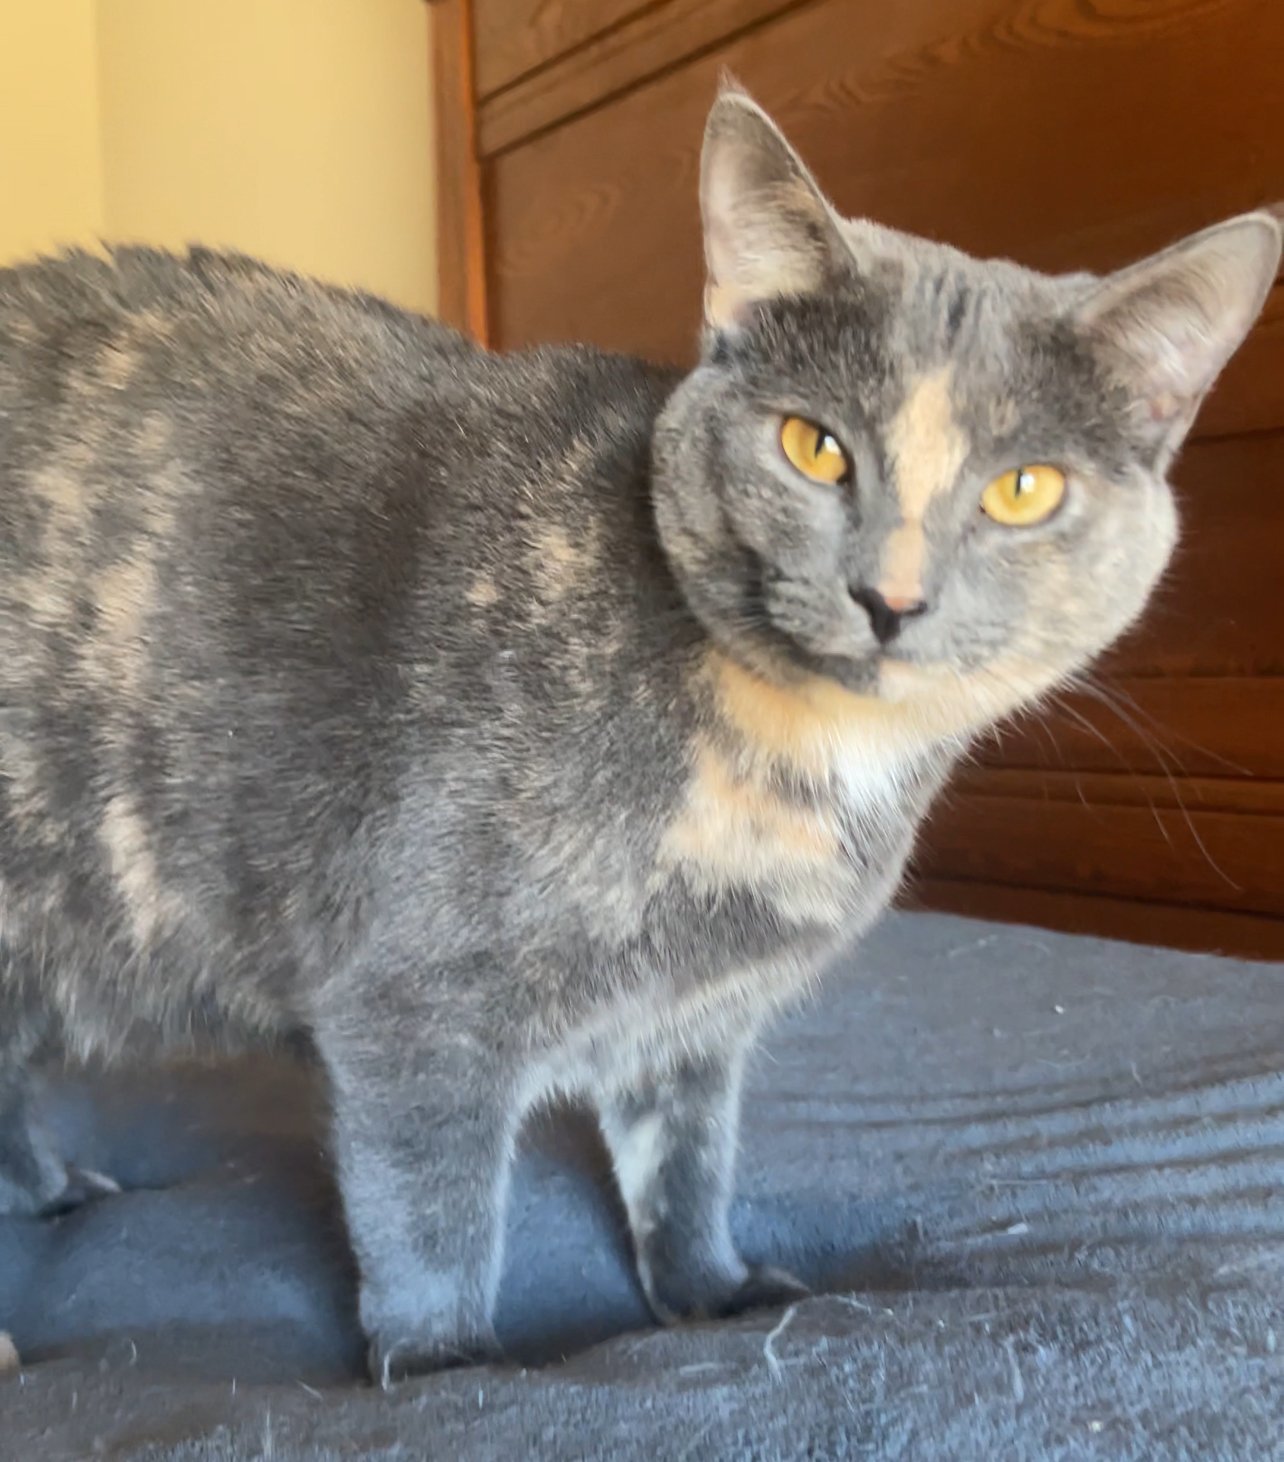 ZOEY - Lovely Gray/pinkish - See her FACE!